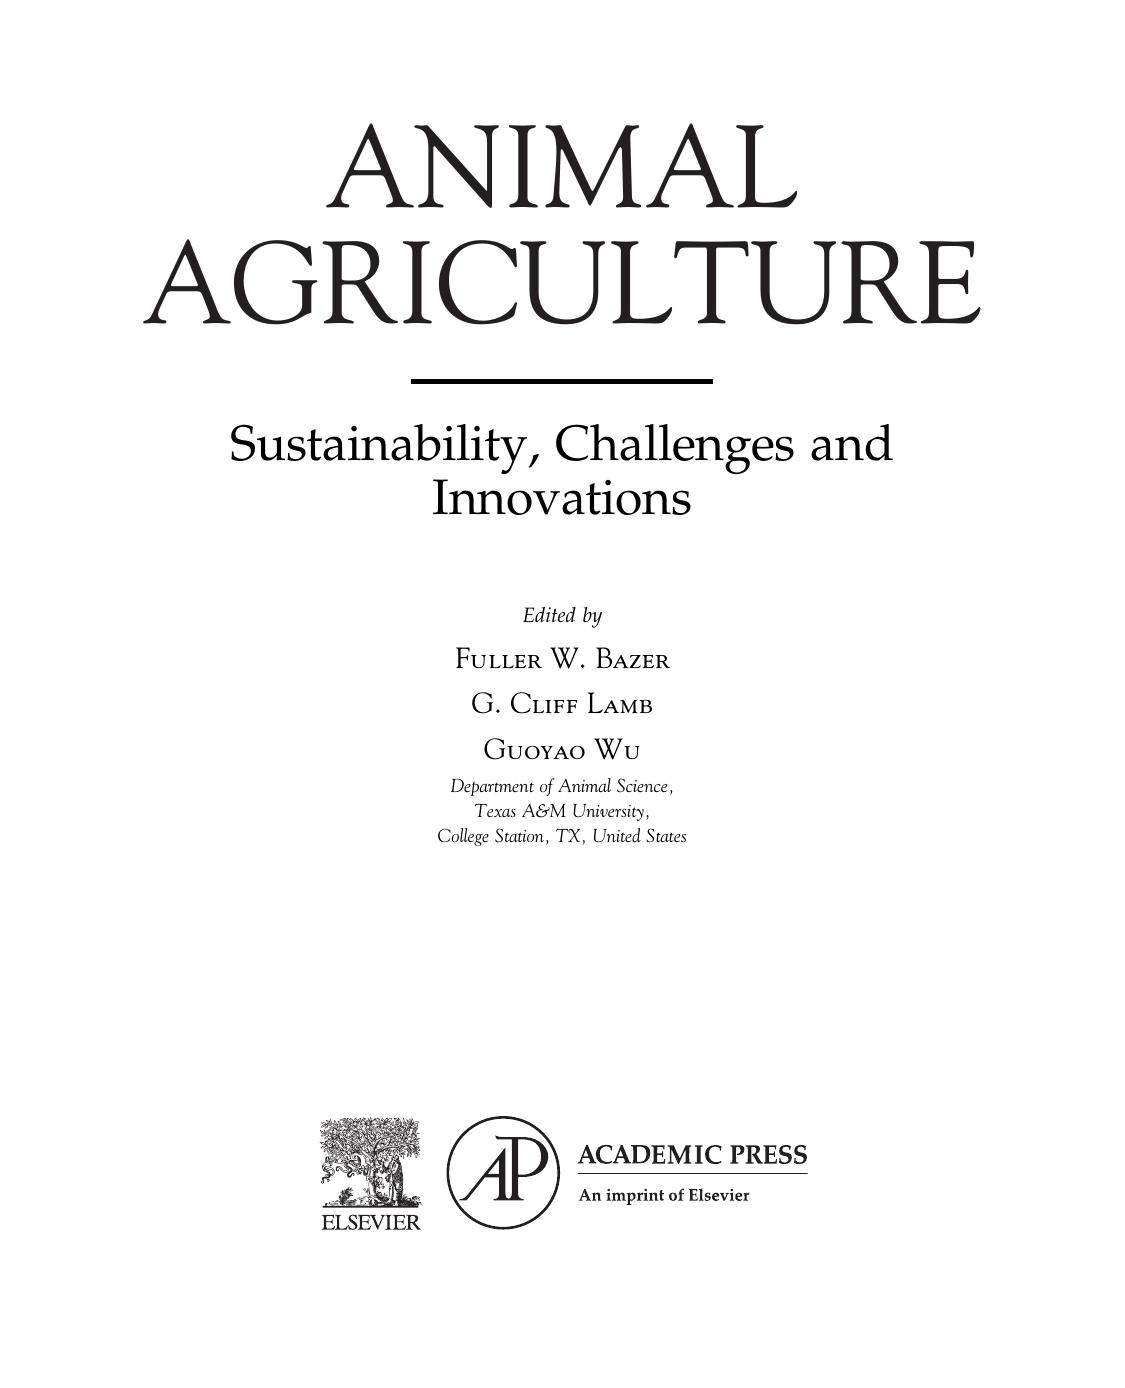 Animal Agriculture Sustainability, Challenges and Innovations 2020